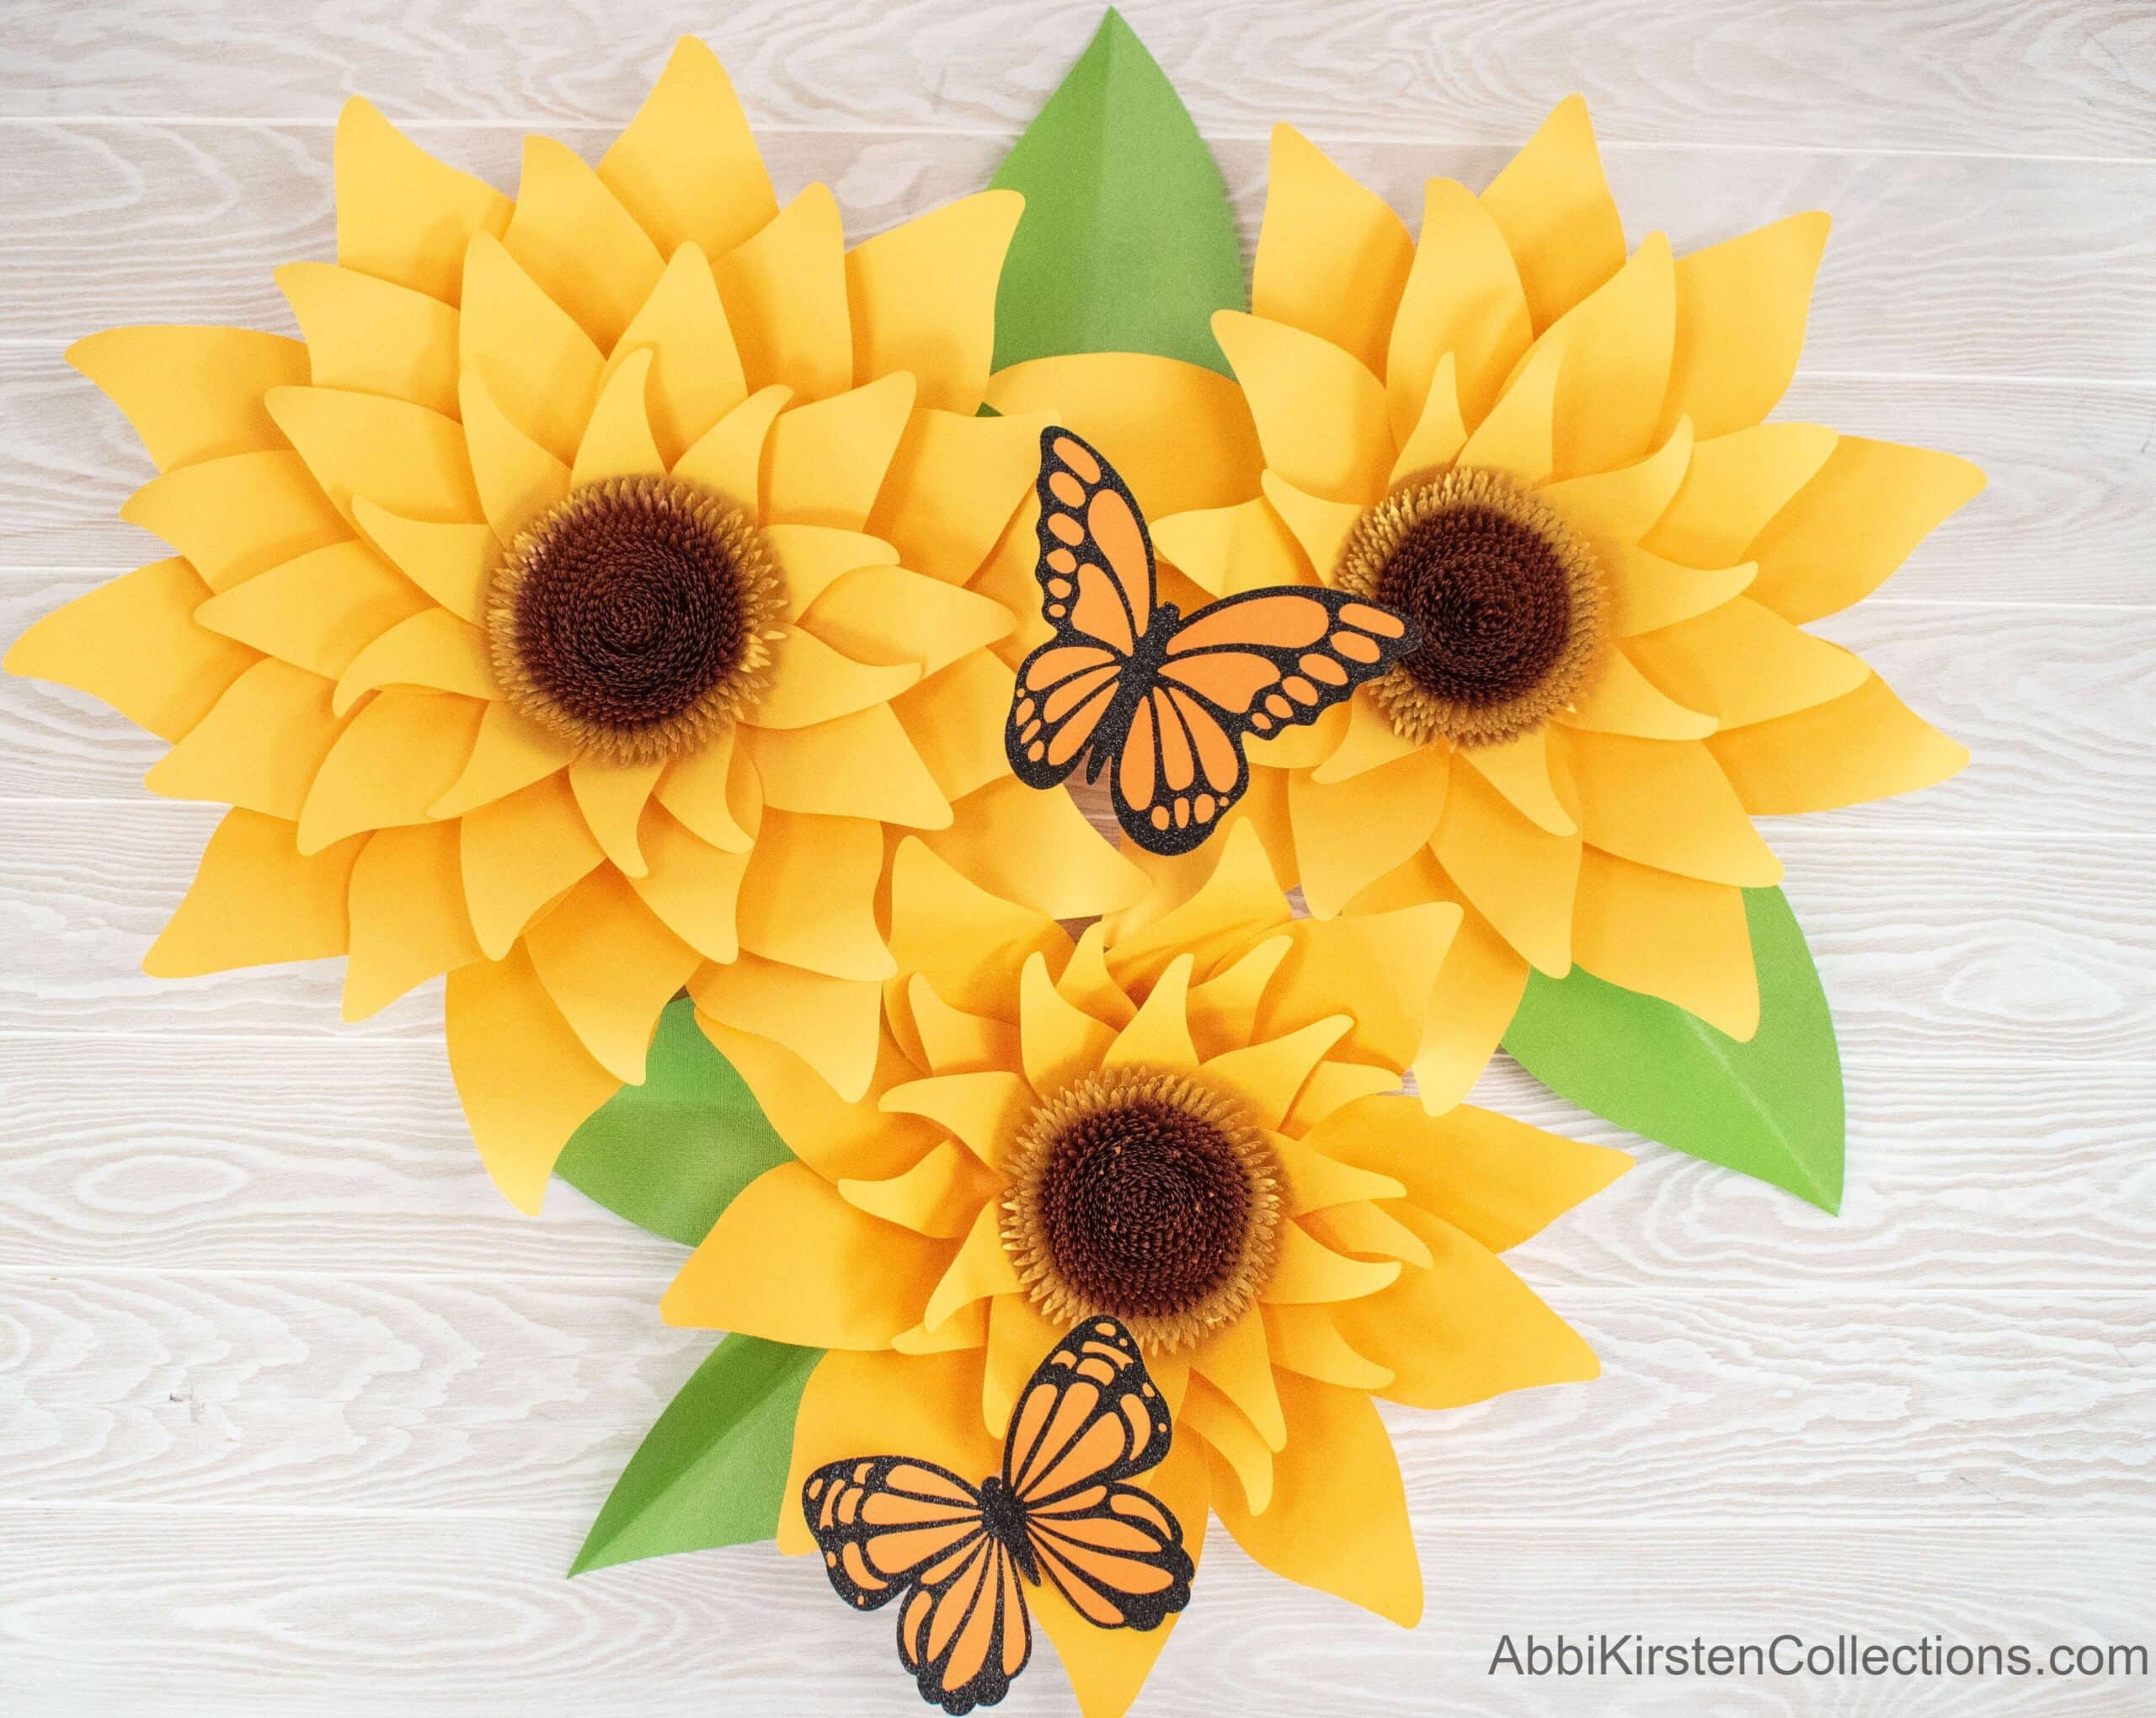 Three large paper yellow sunflowers viewed from above. Green leaves and Monarch butterflies adorn the flowers on a white and light gray wooden table. 